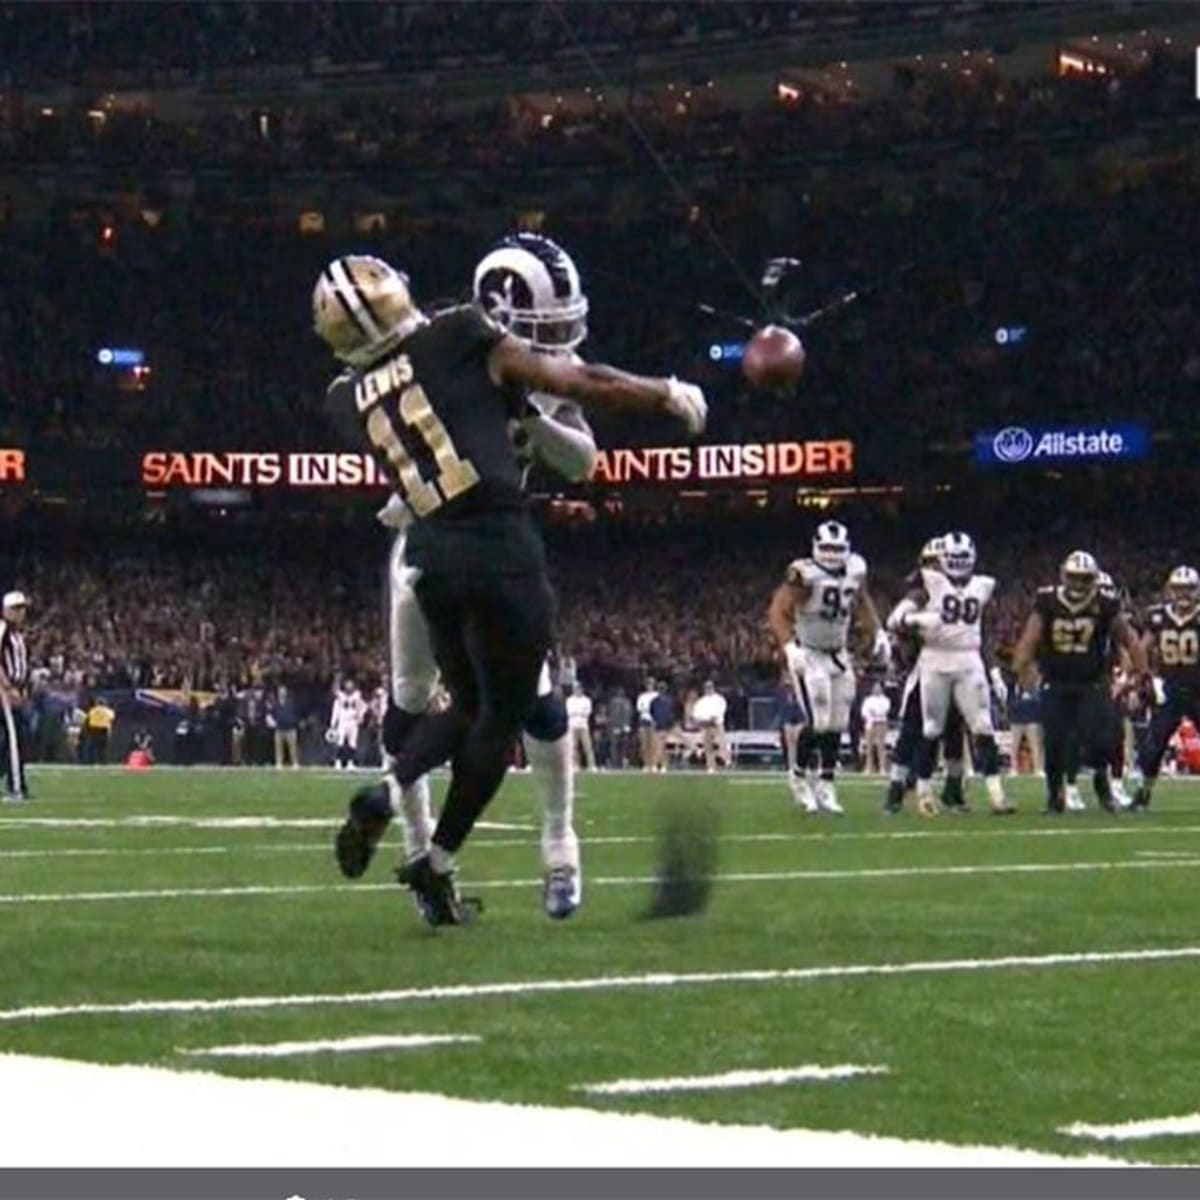 Interaktion gentagelse Motivere NFC Championship pass interference video: Did refs miss Rams penalty? -  Sports Illustrated